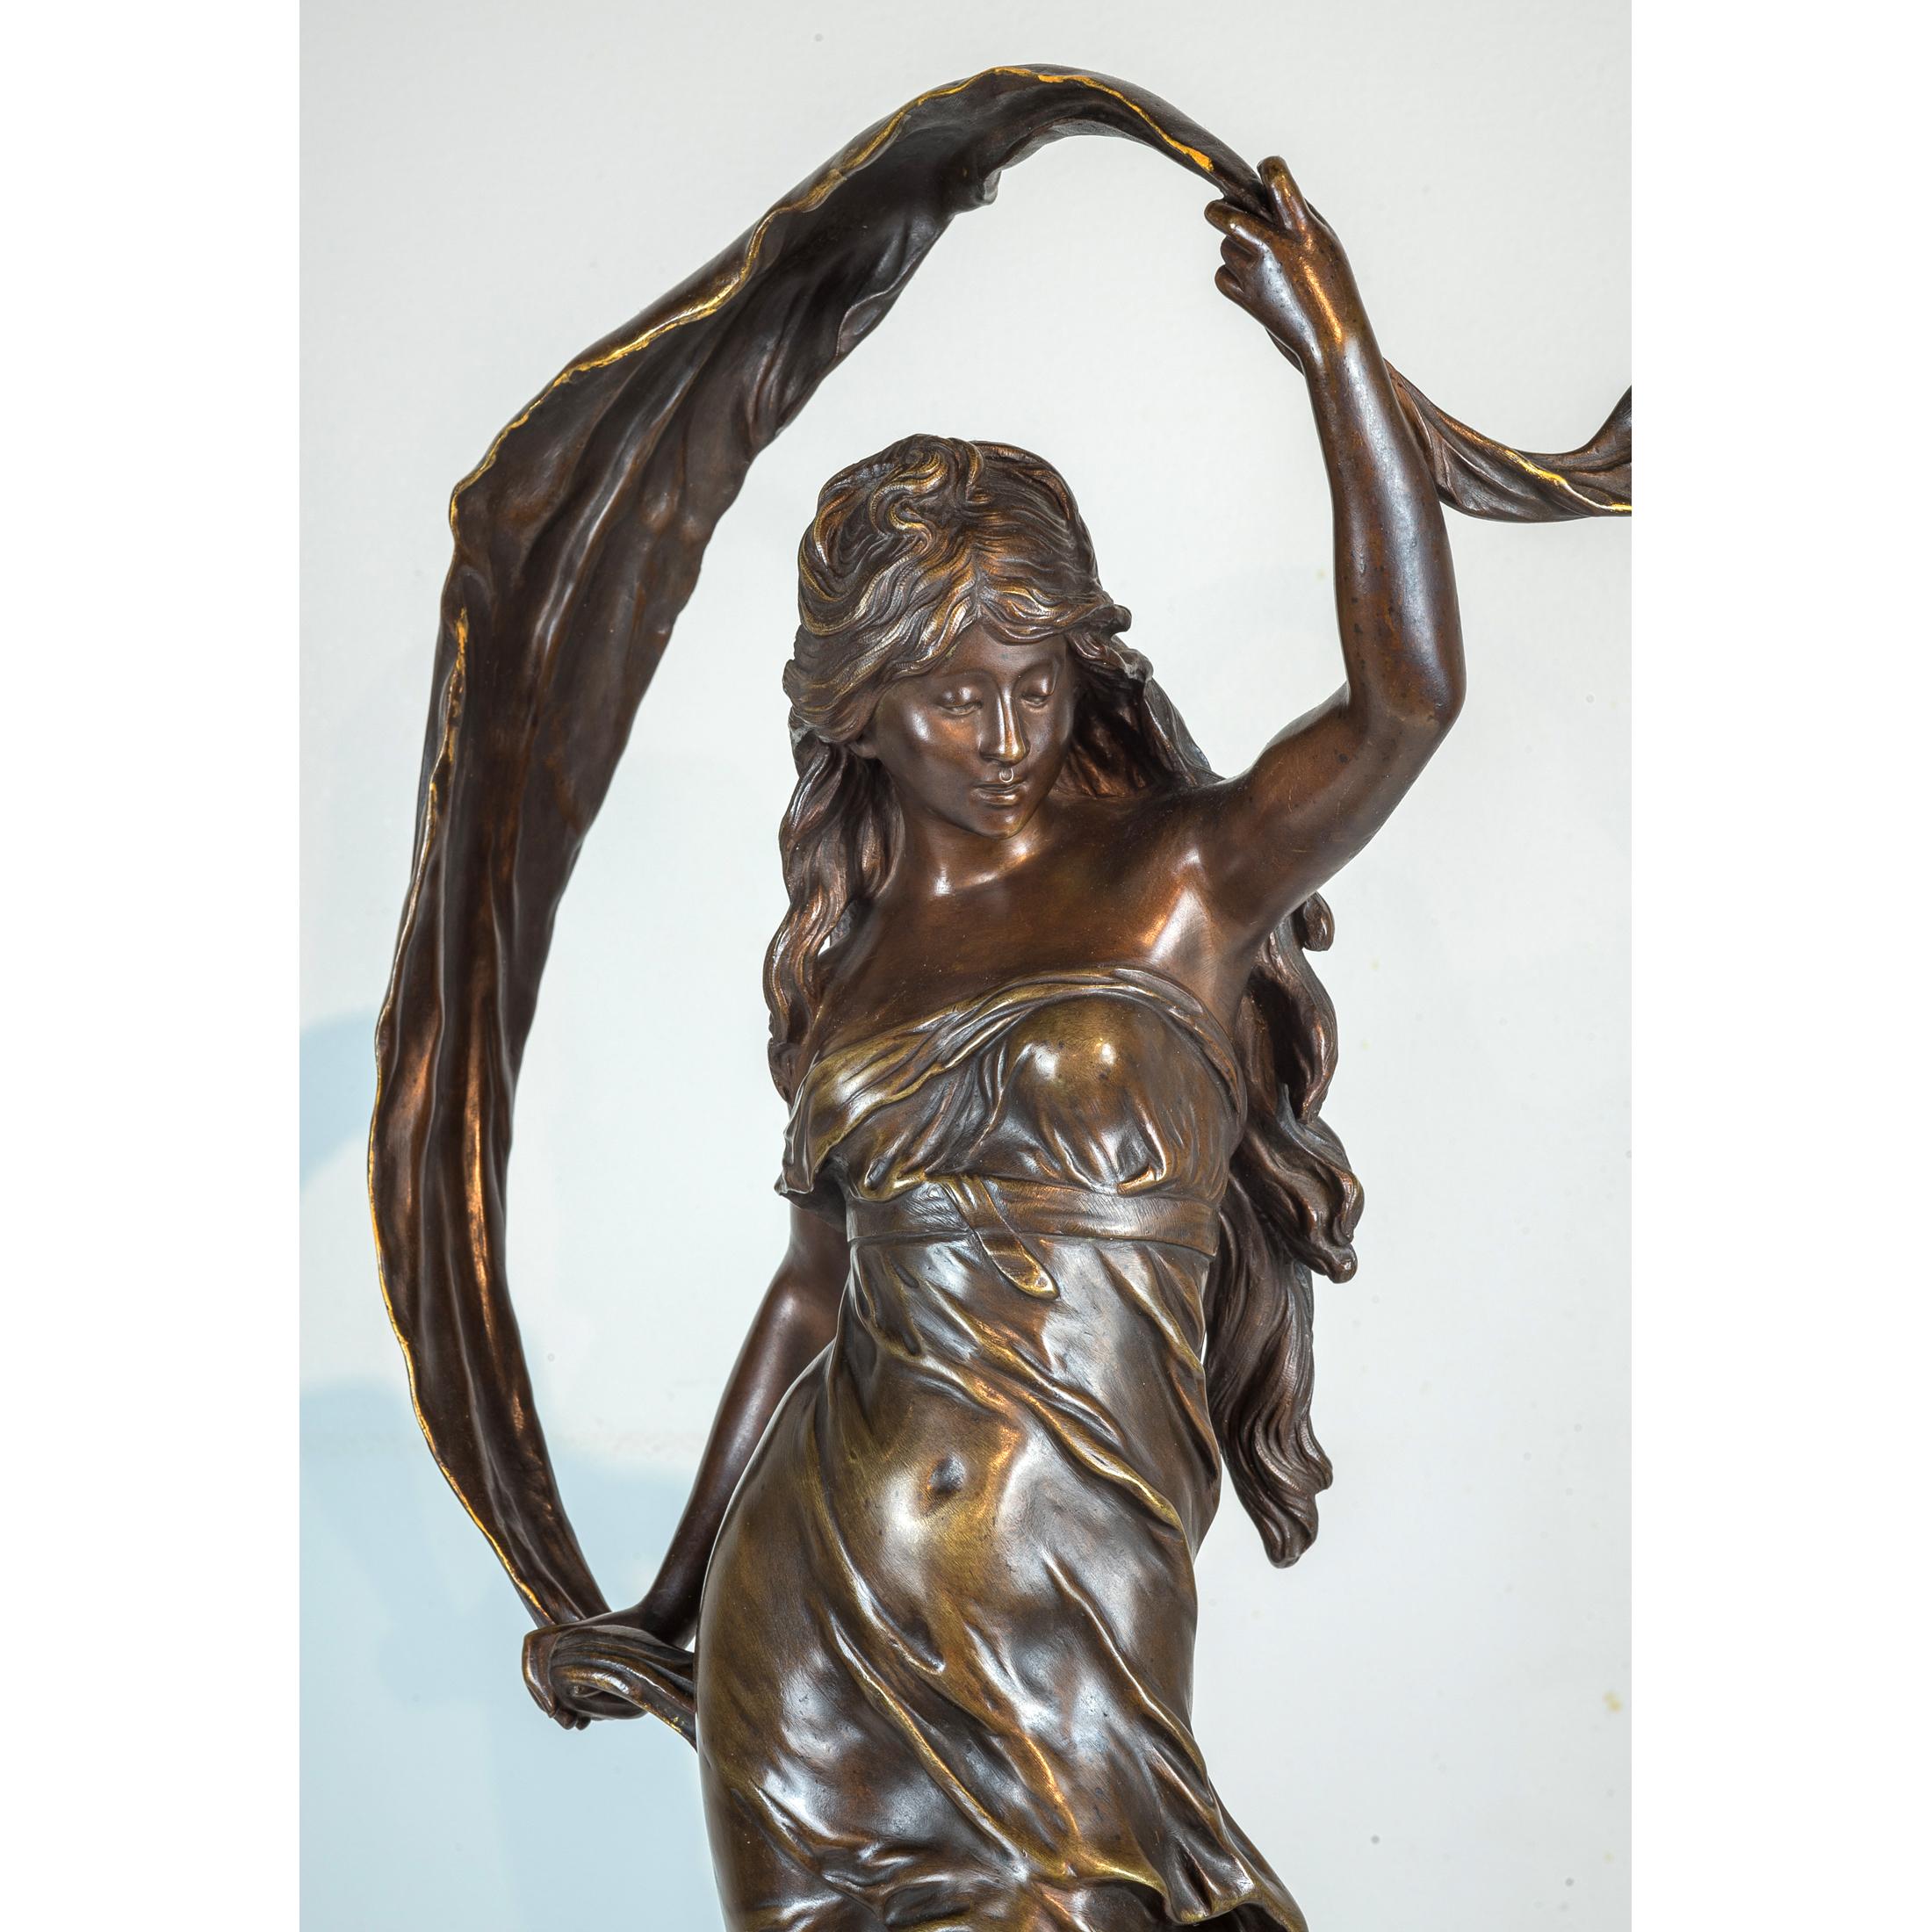 French Fine Patinated Bronze Statue Entitled ‘AURORE’ by Auguste Moreau